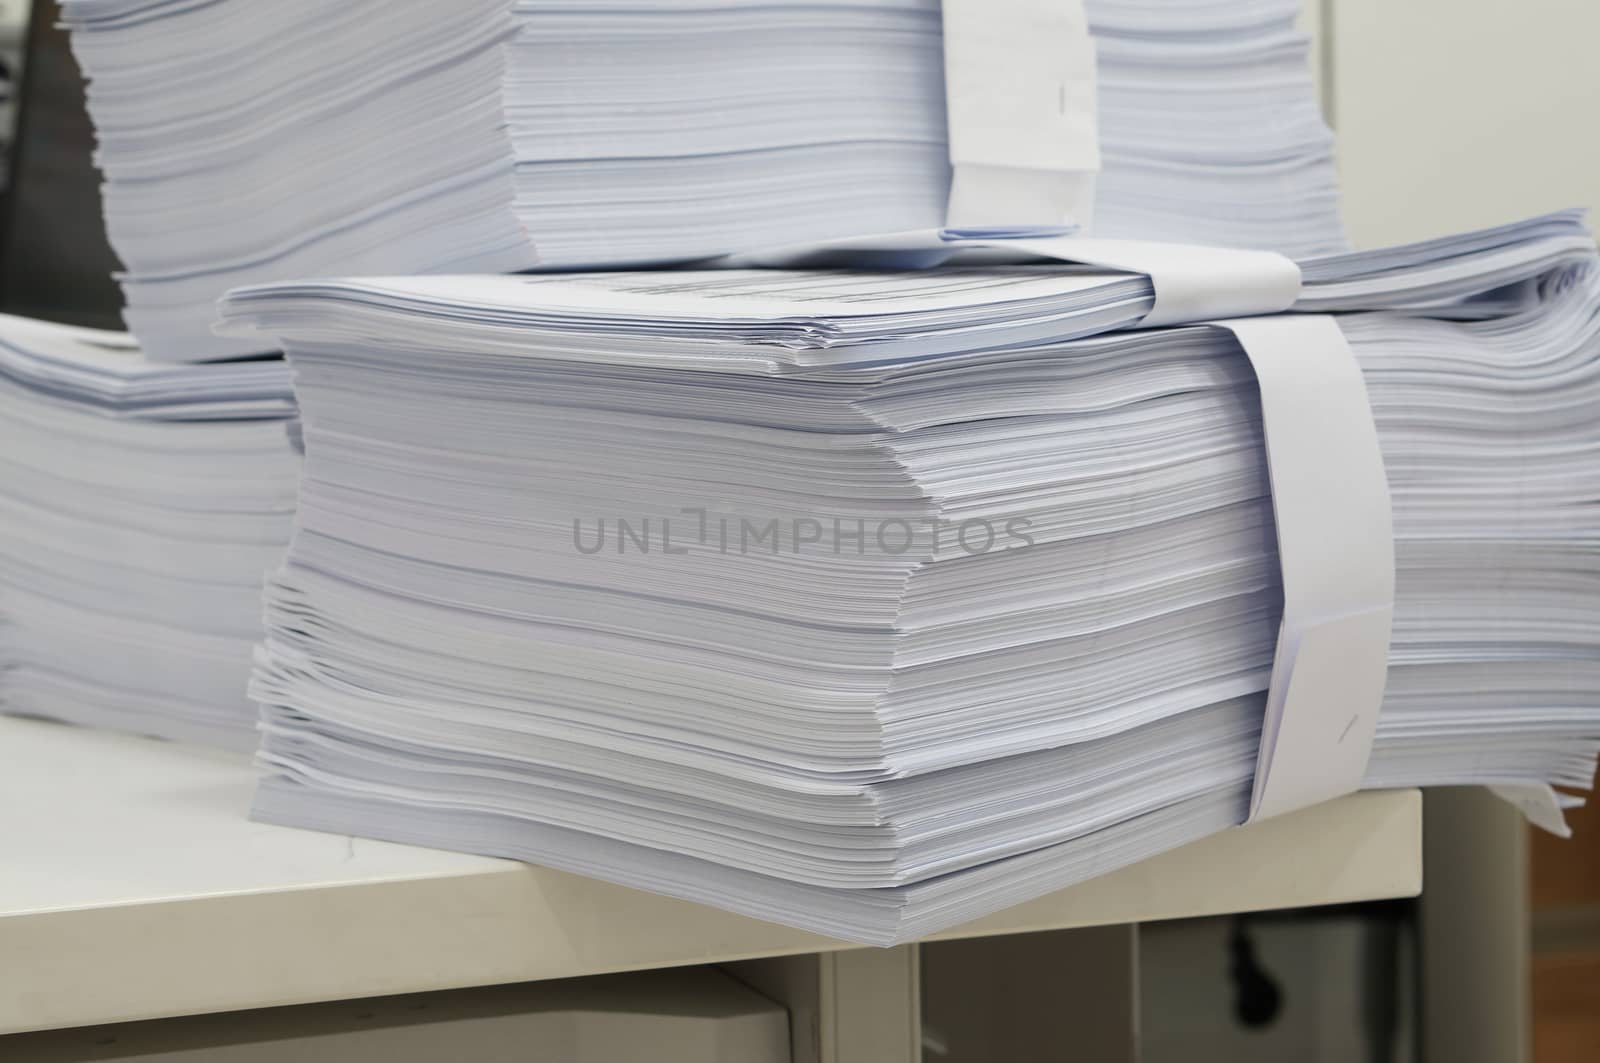 Document prepared as stack by ninun